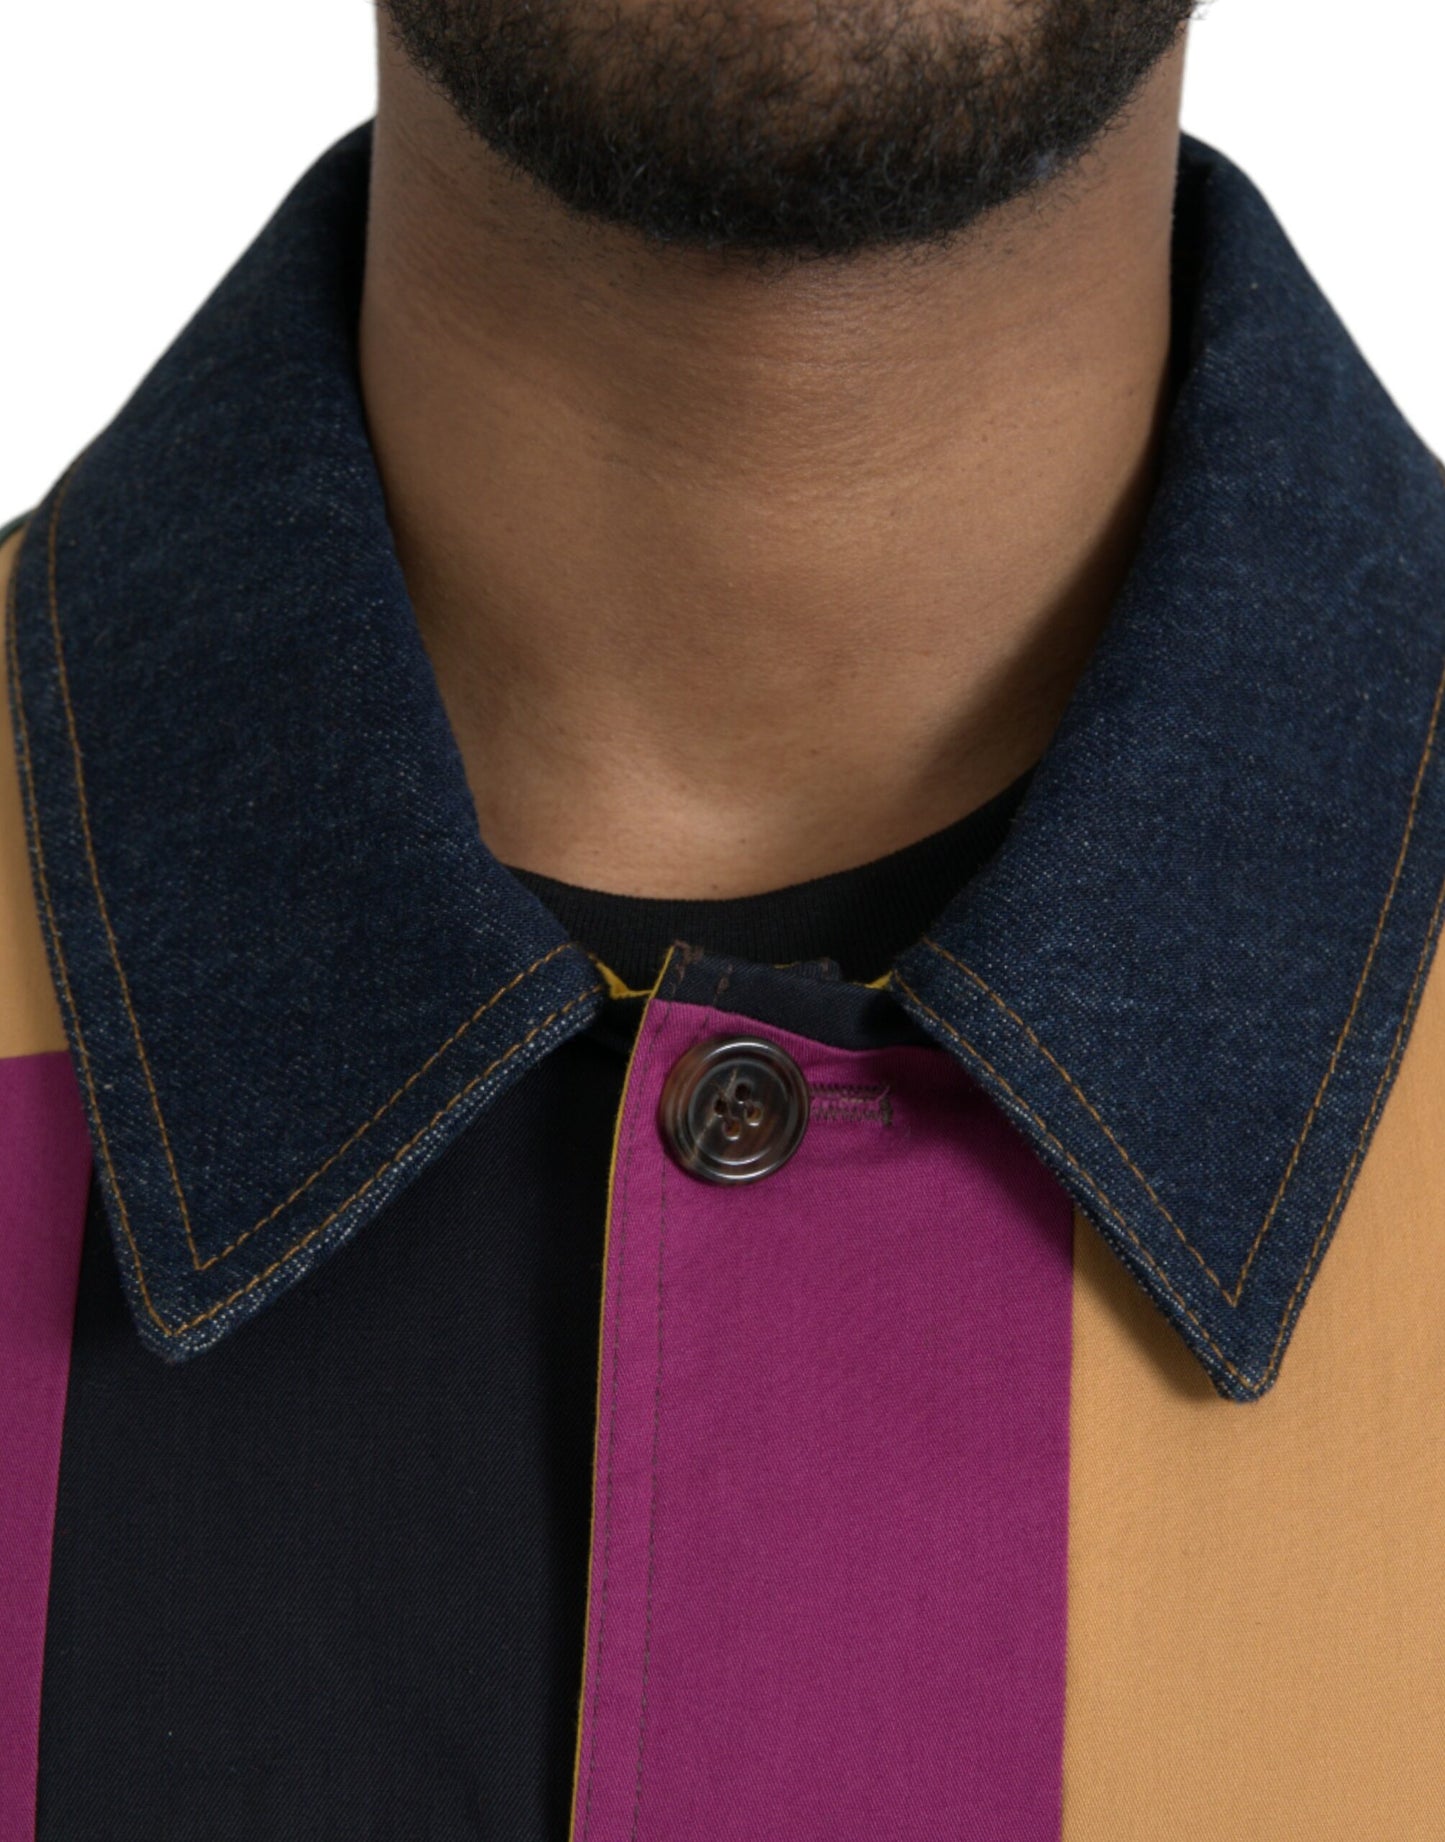 Dolce & Gabbana Multicolor Patchwork Cotton Collared Jacket